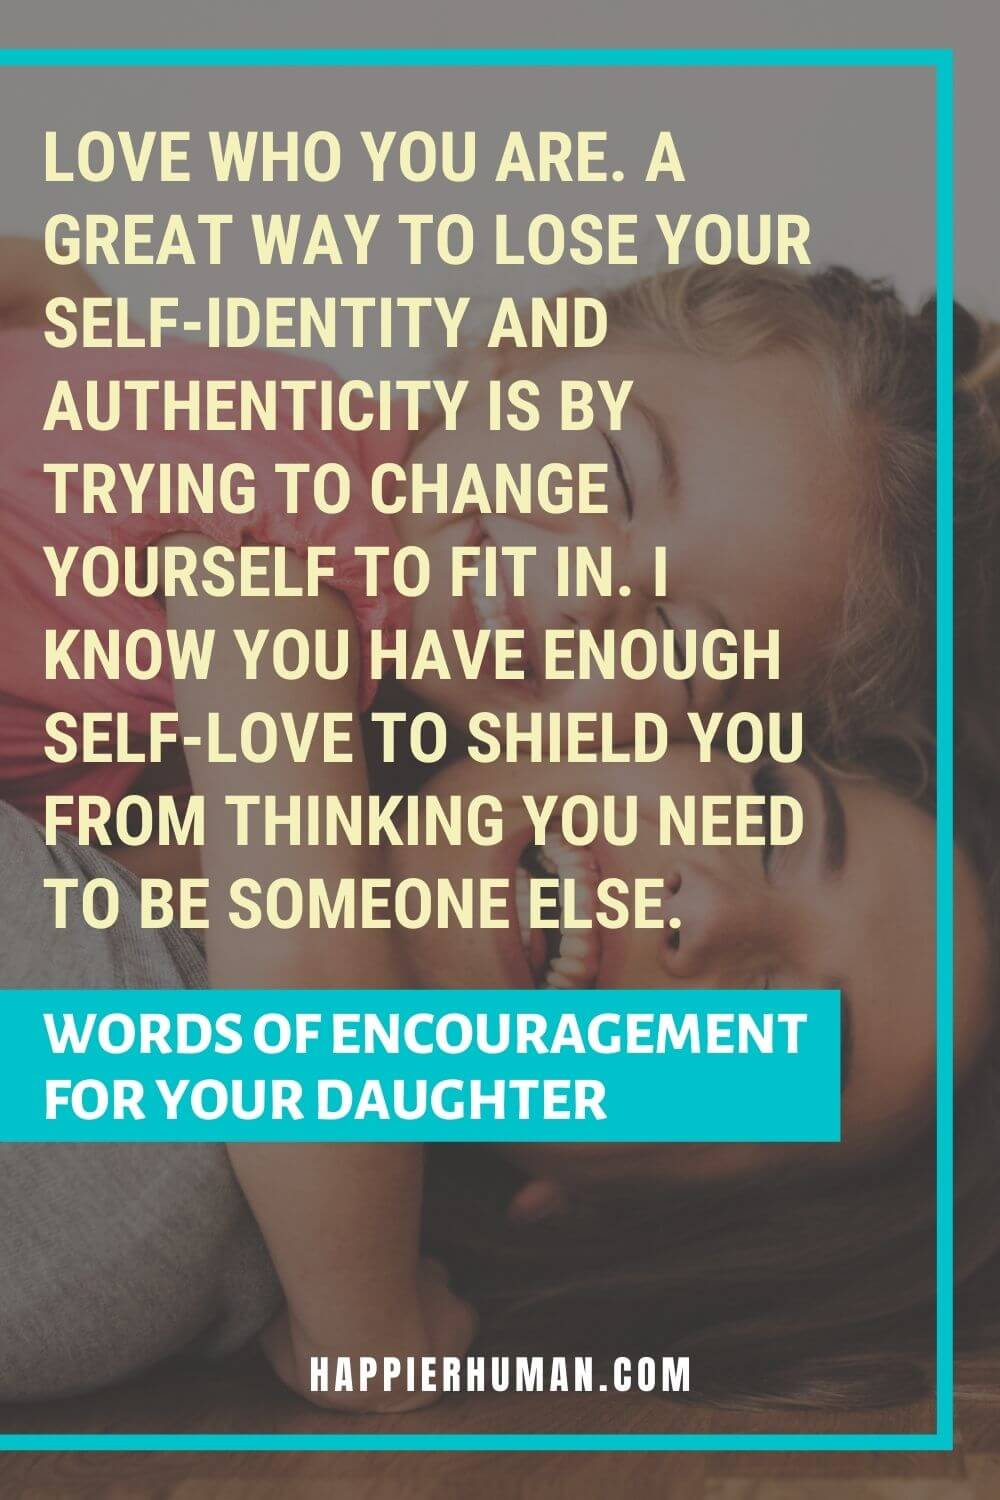 Words of Encouragement for Daughter - Love who you are. A great way to lose your self-identity and authenticity is by trying to change yourself to fit in. I know you have enough self-love to shield you from thinking you need to be someone else. | encouraging words for daughter from dad | words of encouragement for daughter in school | encouraging words for my daughter in college